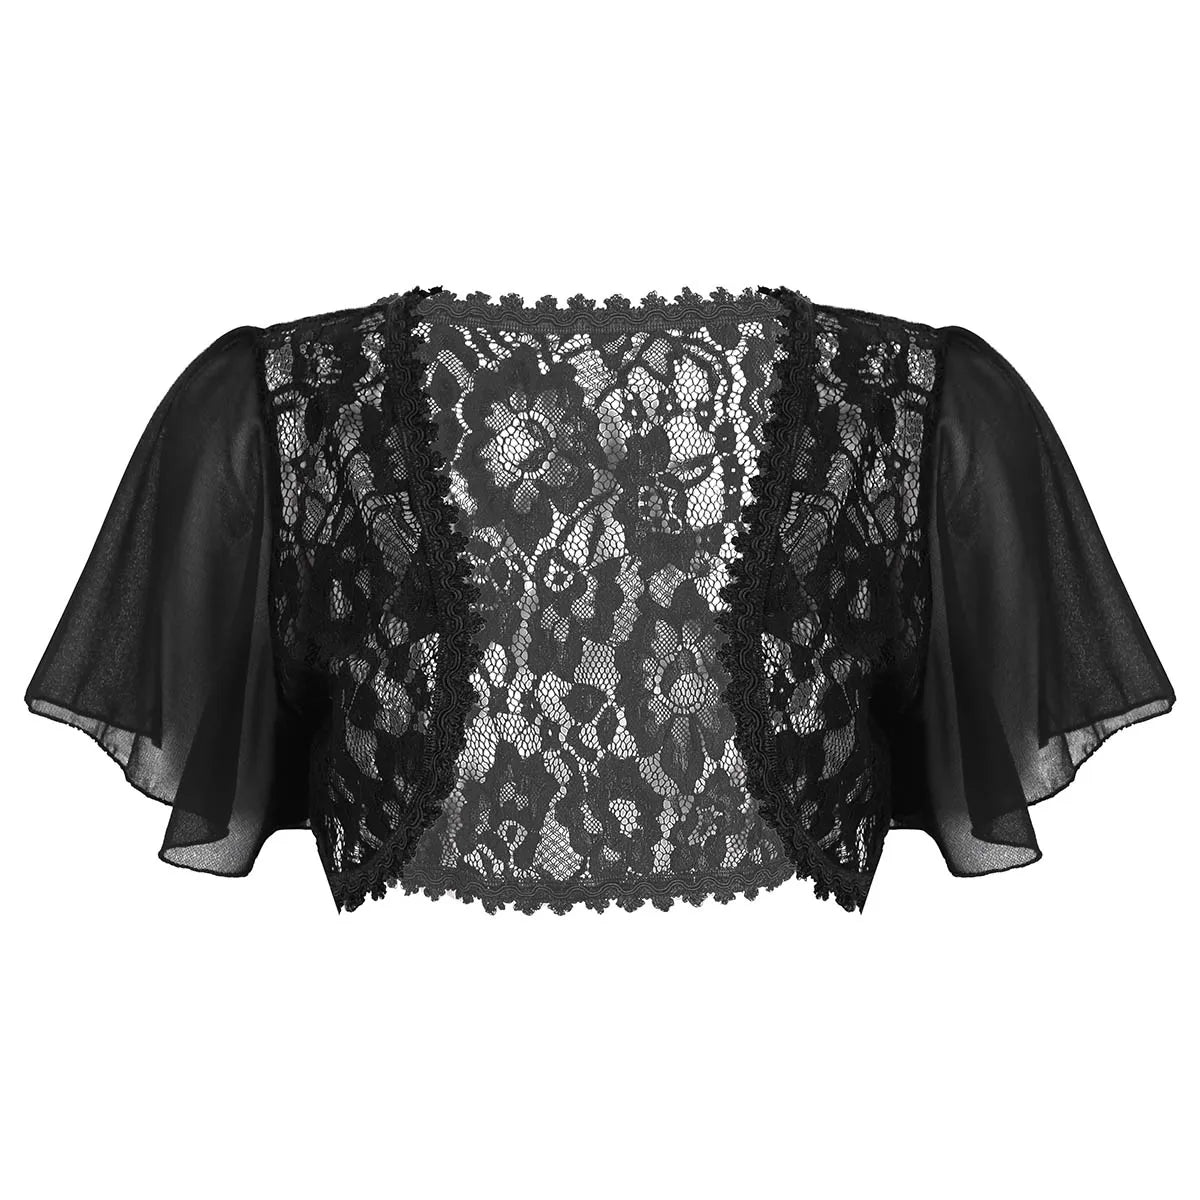 Shrugged- the 1930s Inspired Lace Shrug 2 Colors